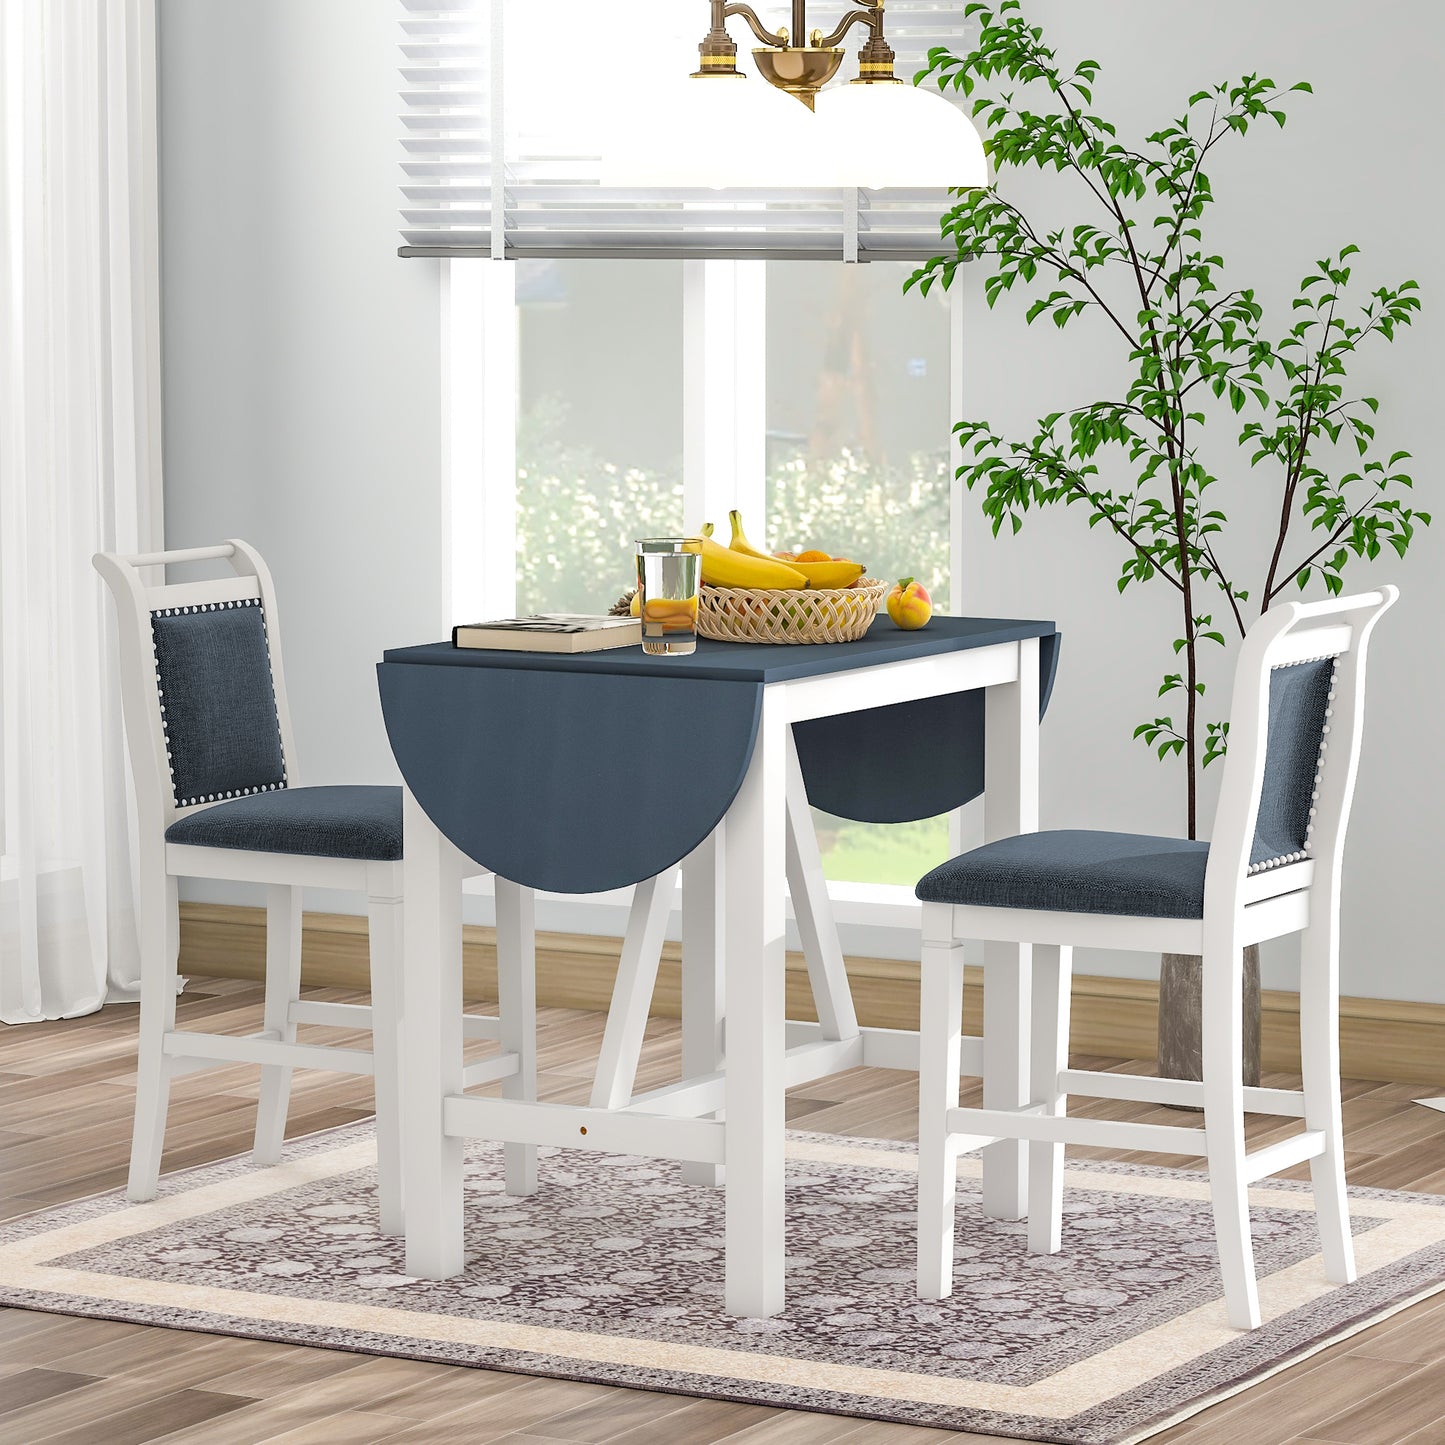 TOPMAX 3 Piece Wood Drop Leaf Dining Table Set  White/Gray